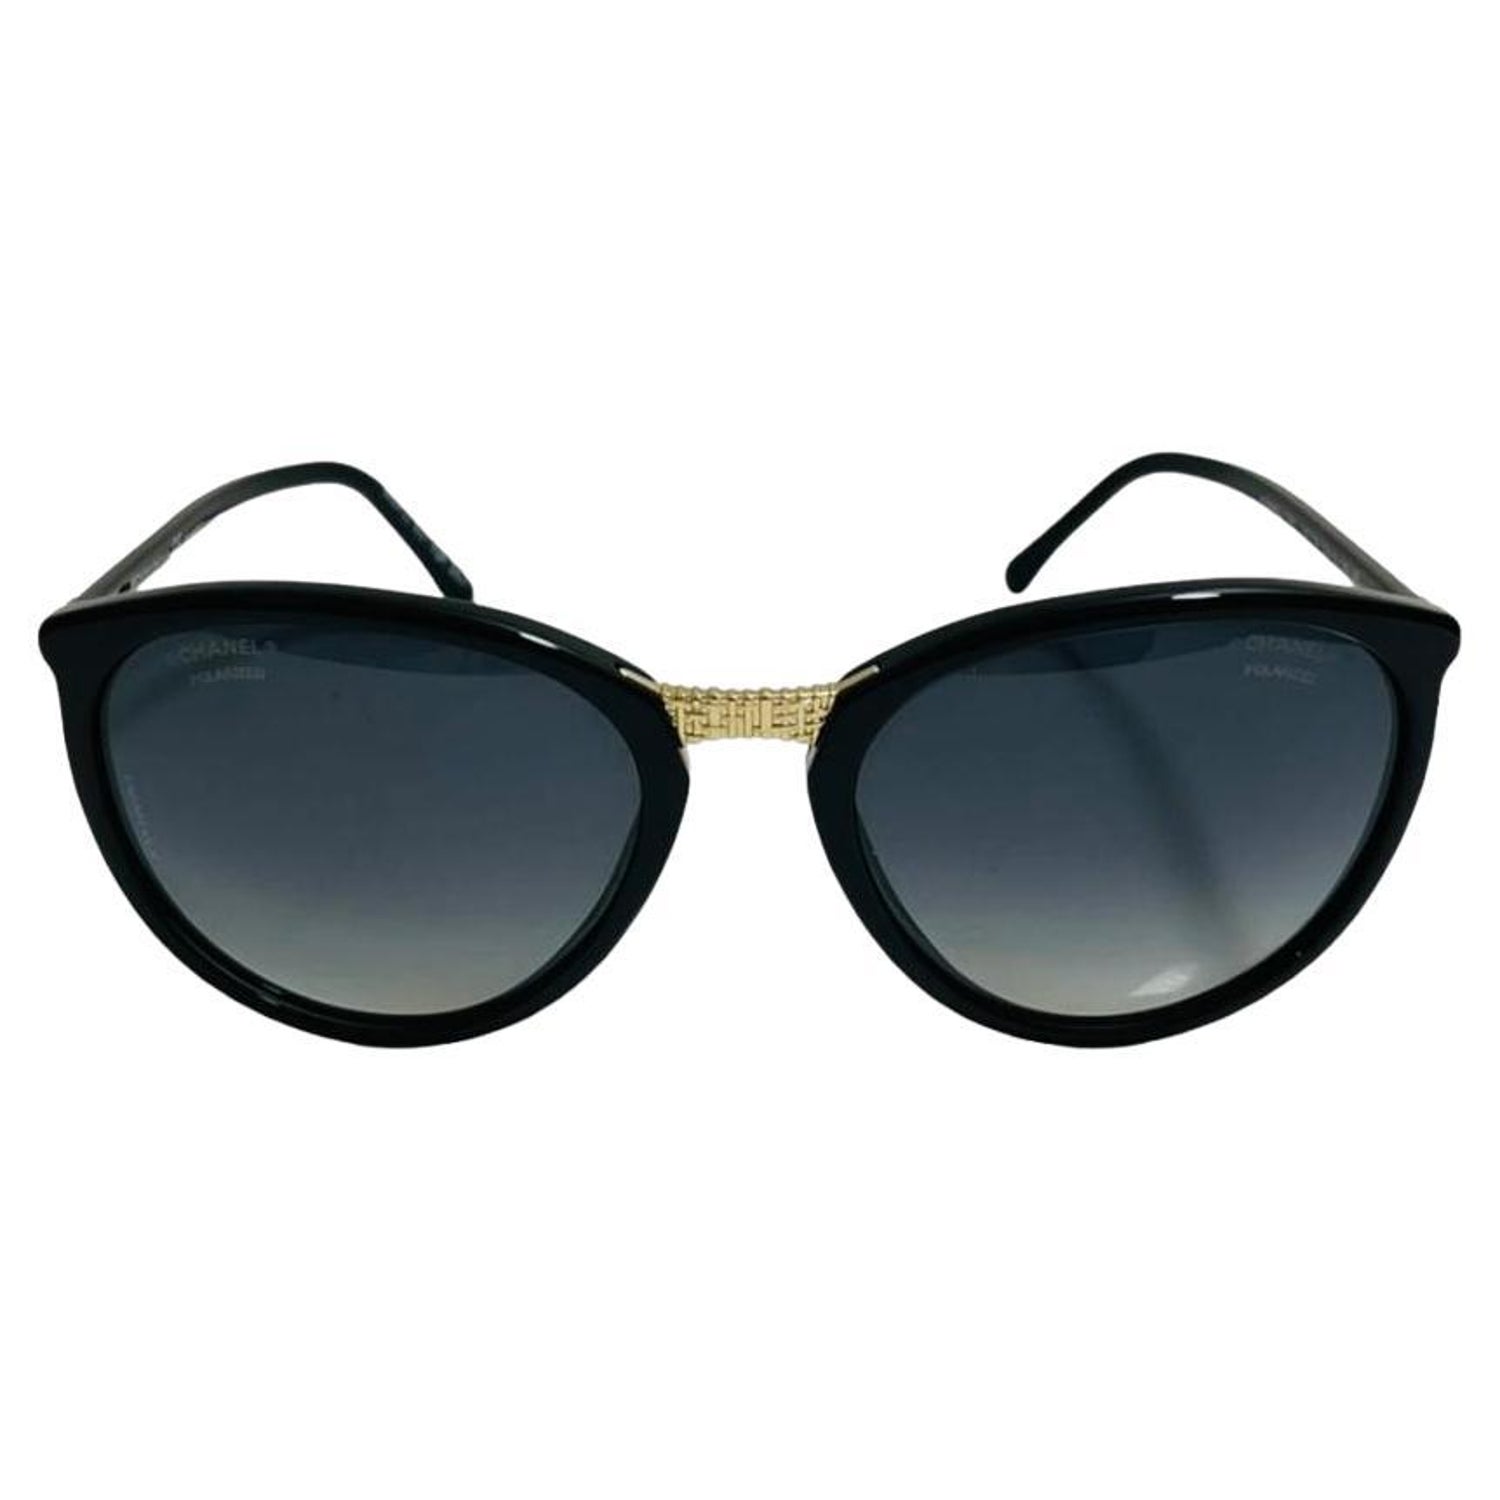 Chanel Polarized Sunglasses - 4 For Sale on 1stDibs